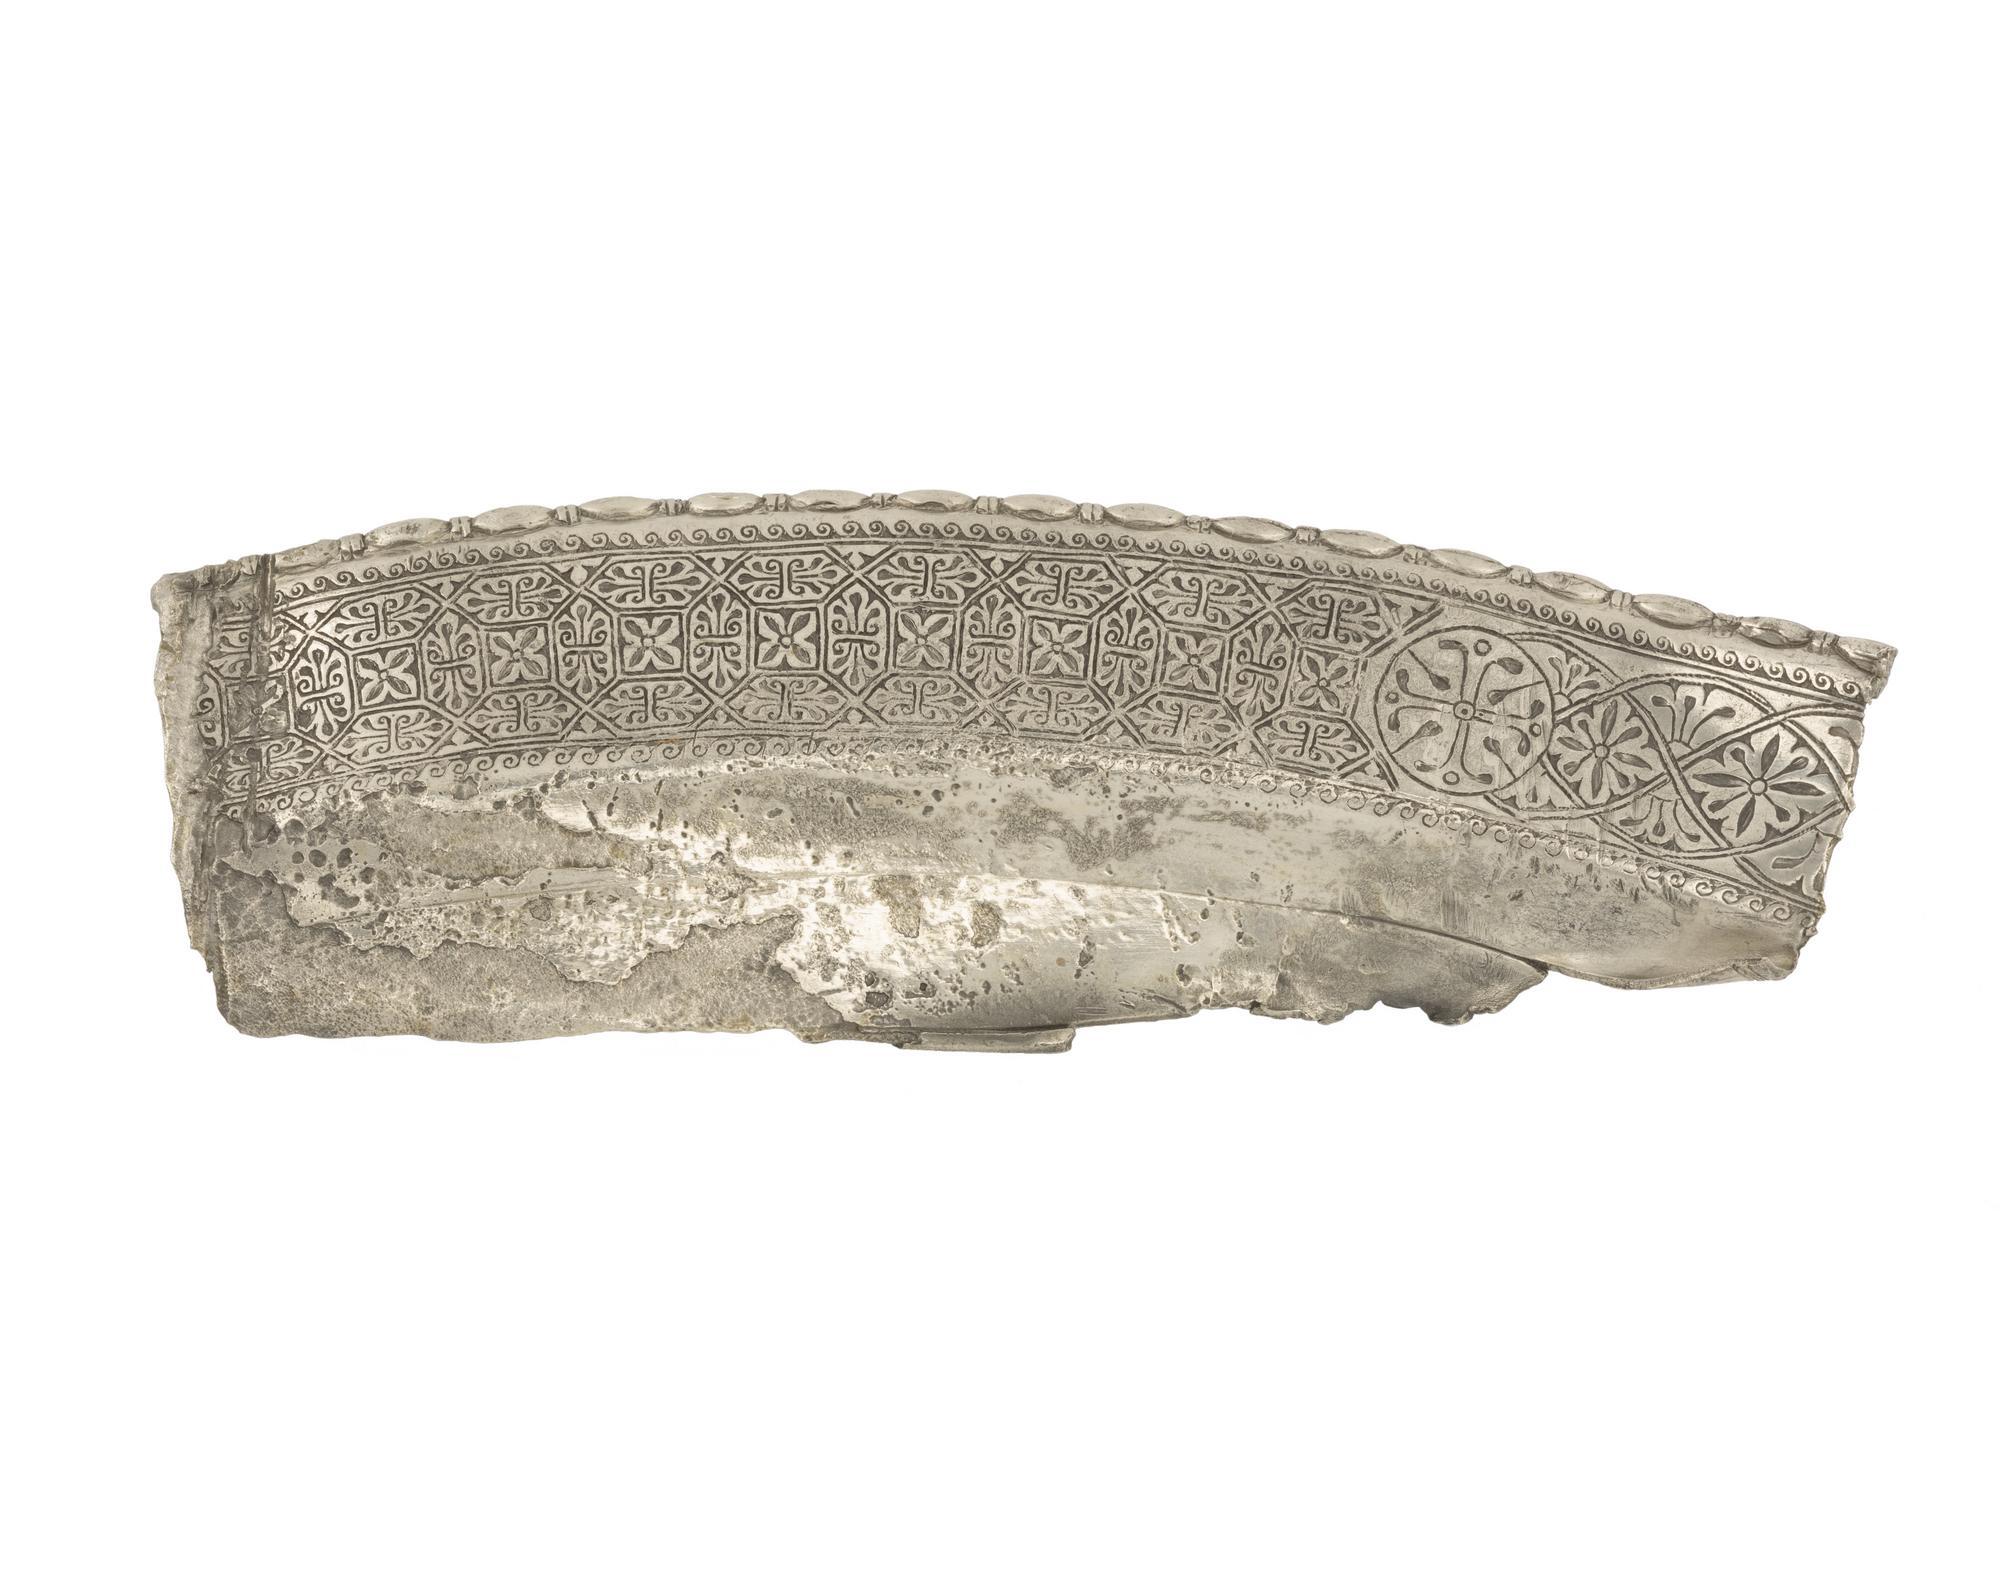 Image of Edge fragment of a flat silver plate with edging of oblong beads and small discs and with niello patterns, from Traprain Law, 410 - 425 AD © National Museums Scotland